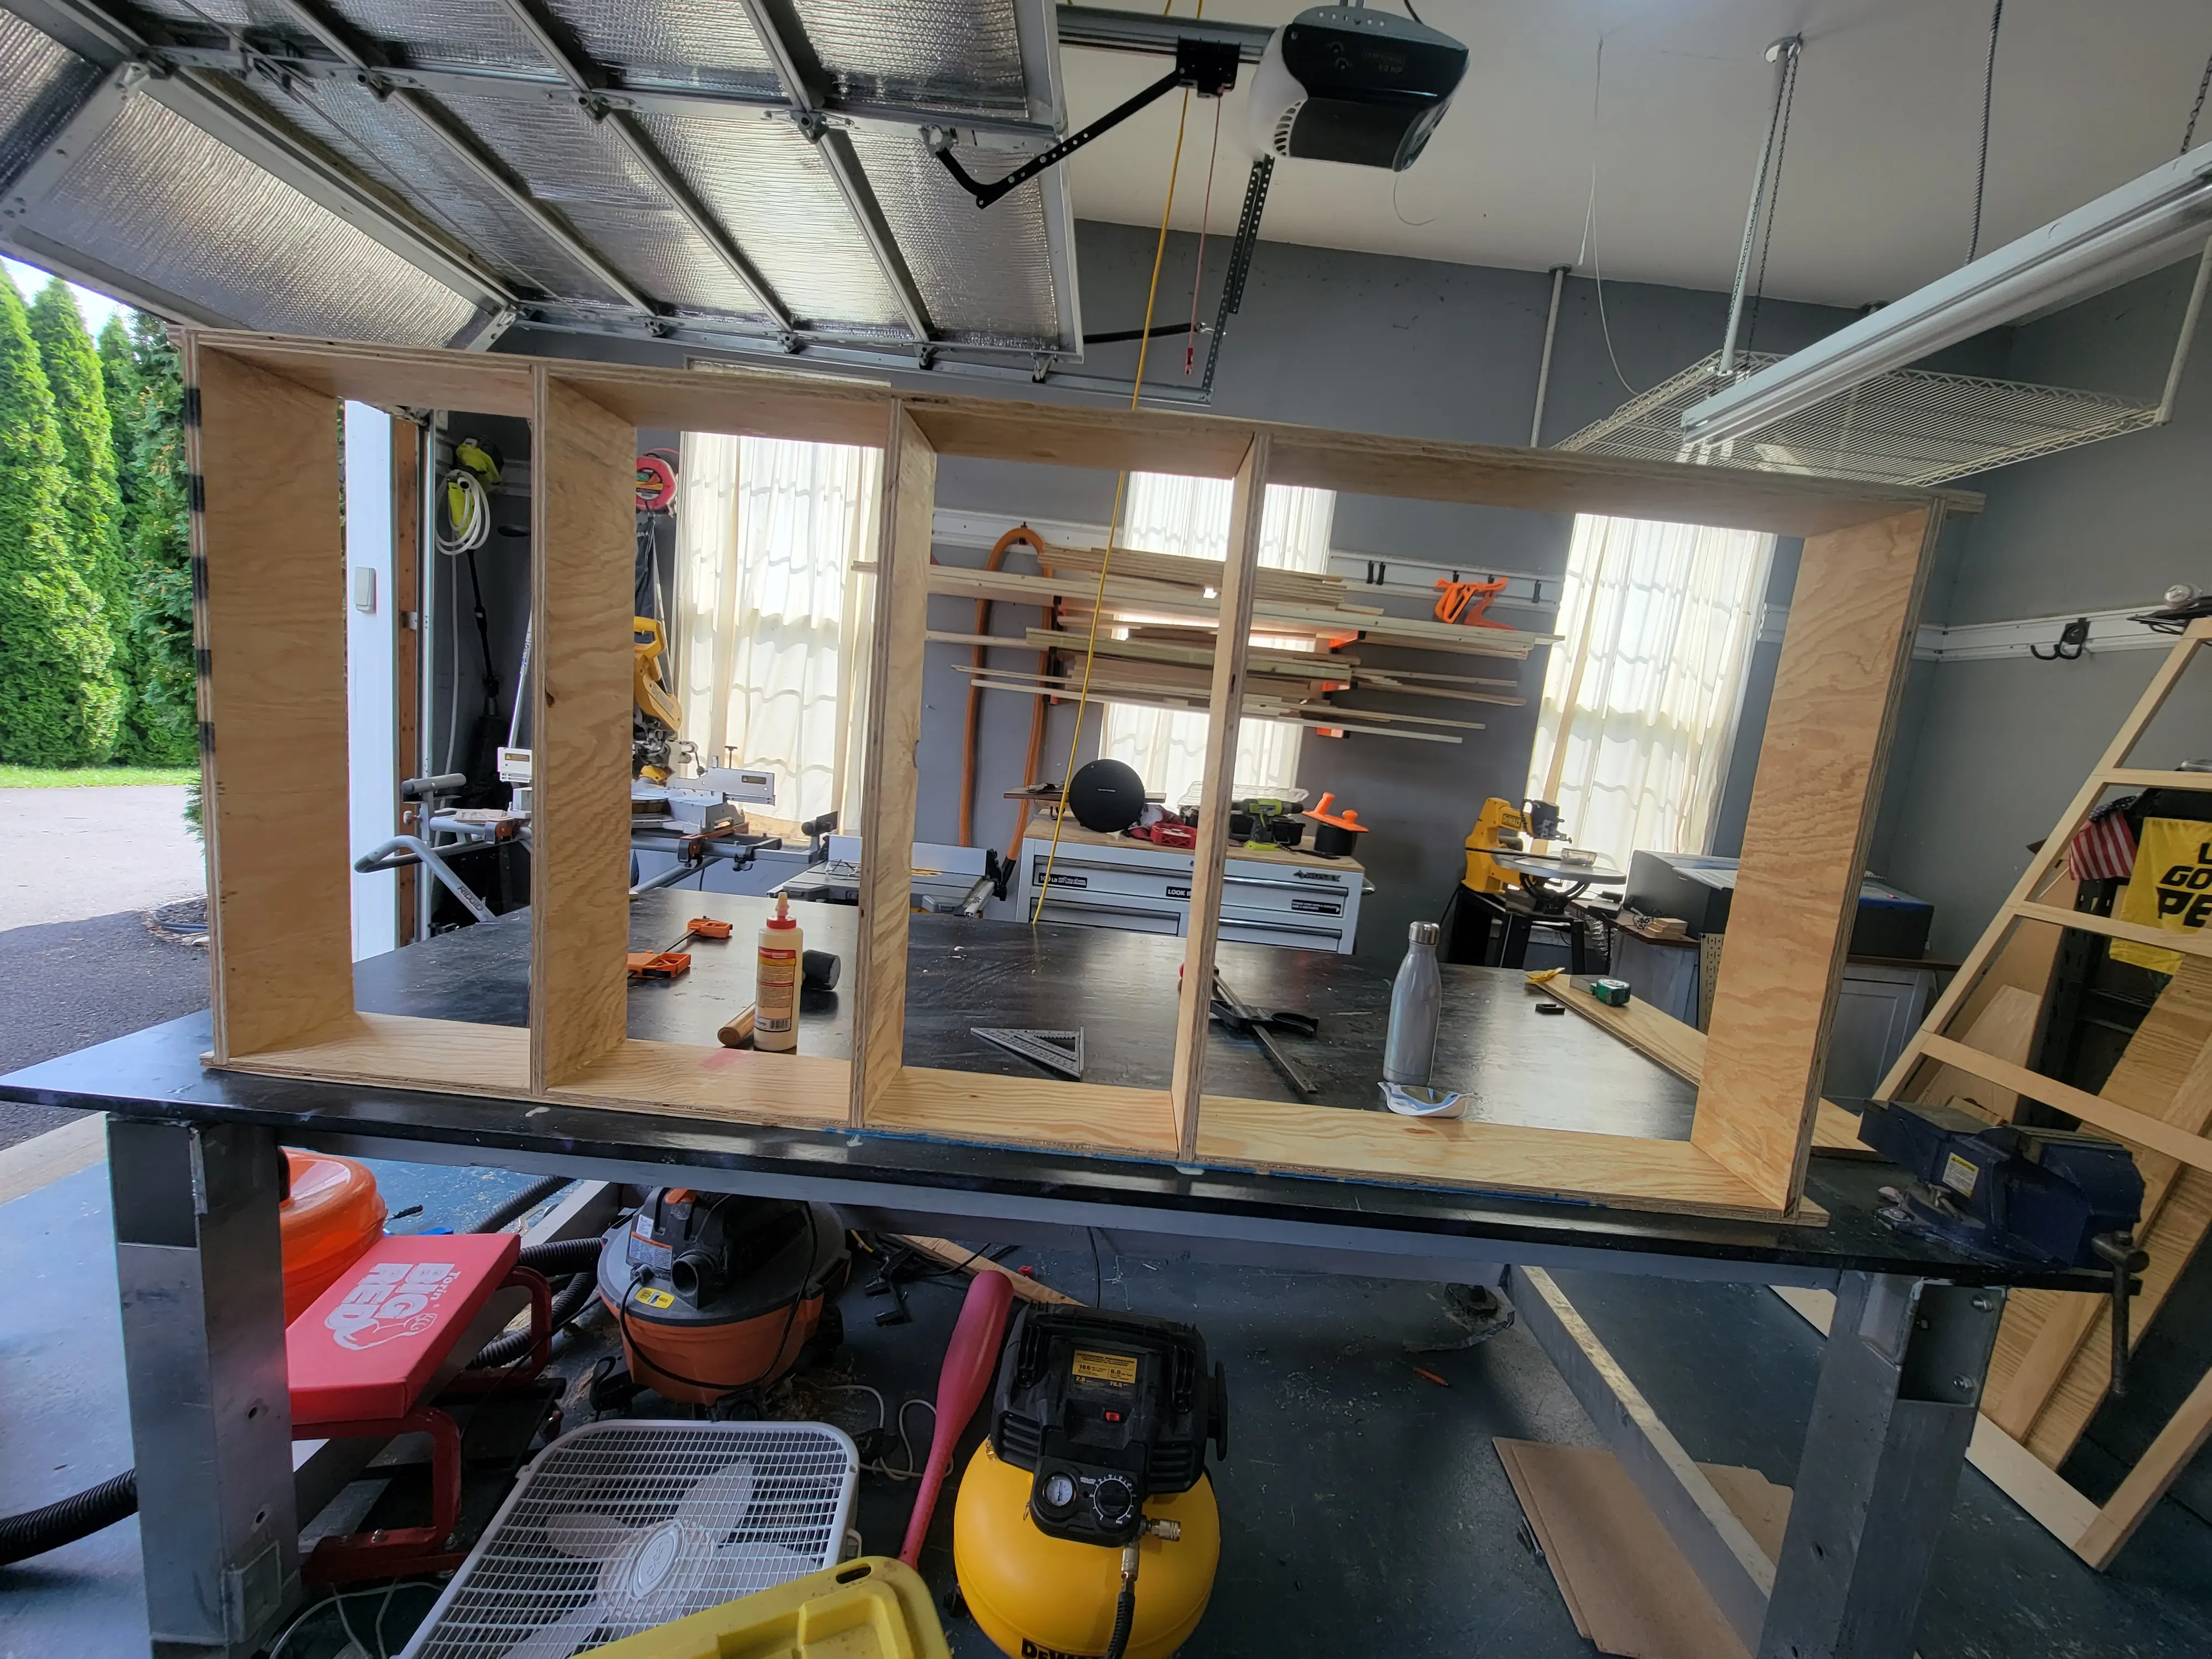 wood face frame in a garage. Garage door is open, face frame is on a workbench. Well lit with a yellow compressor on the floor